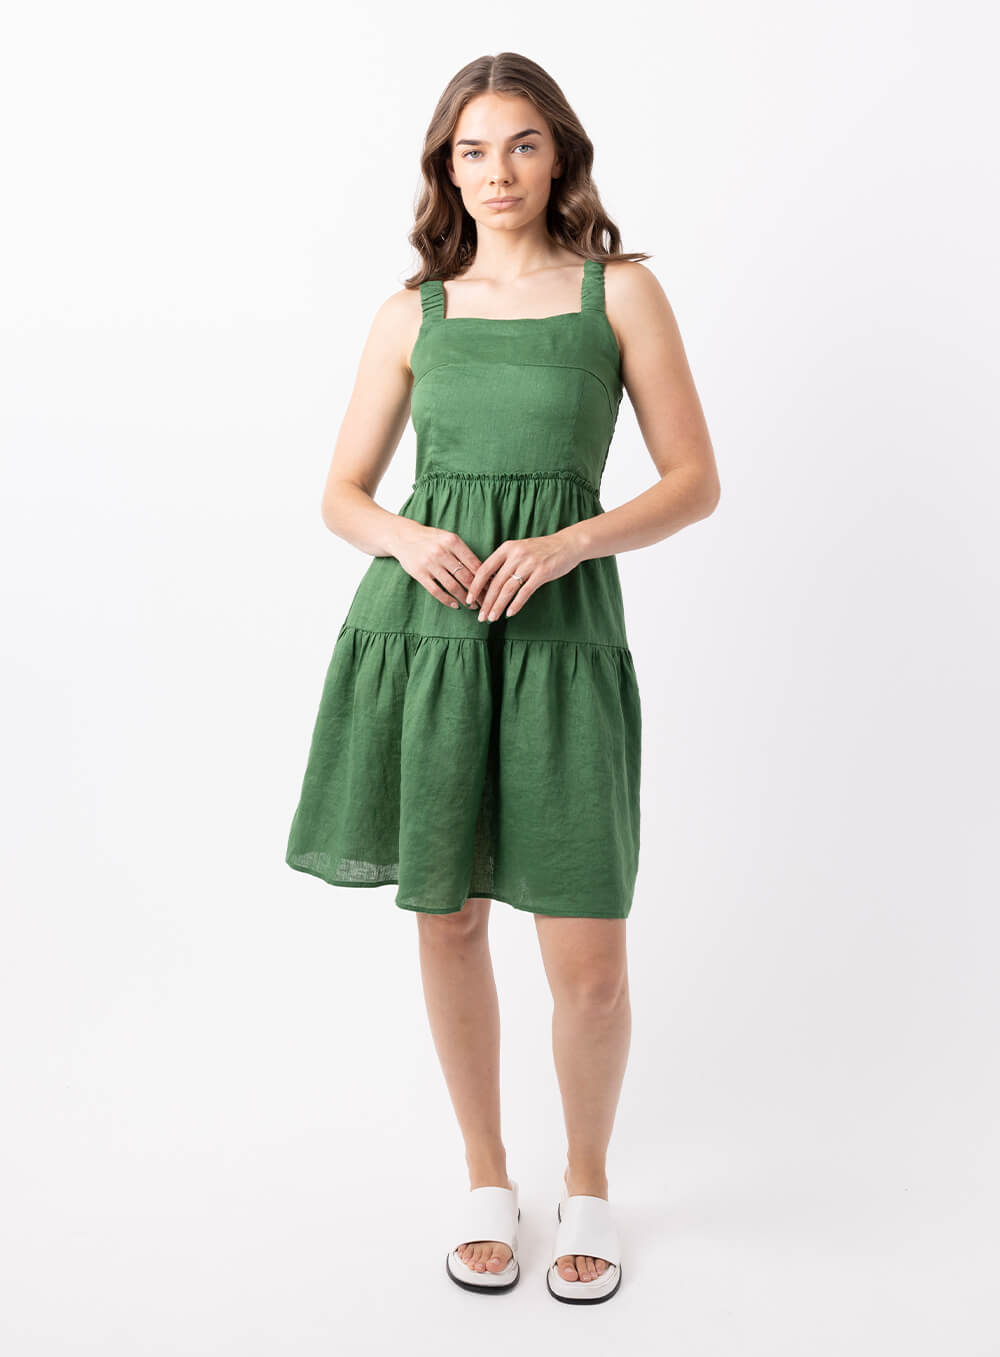 The Aquila linen dress in Green is 100% breathable linen midi in length with a tiered skirt, thin rouched straps and sqquare neckline